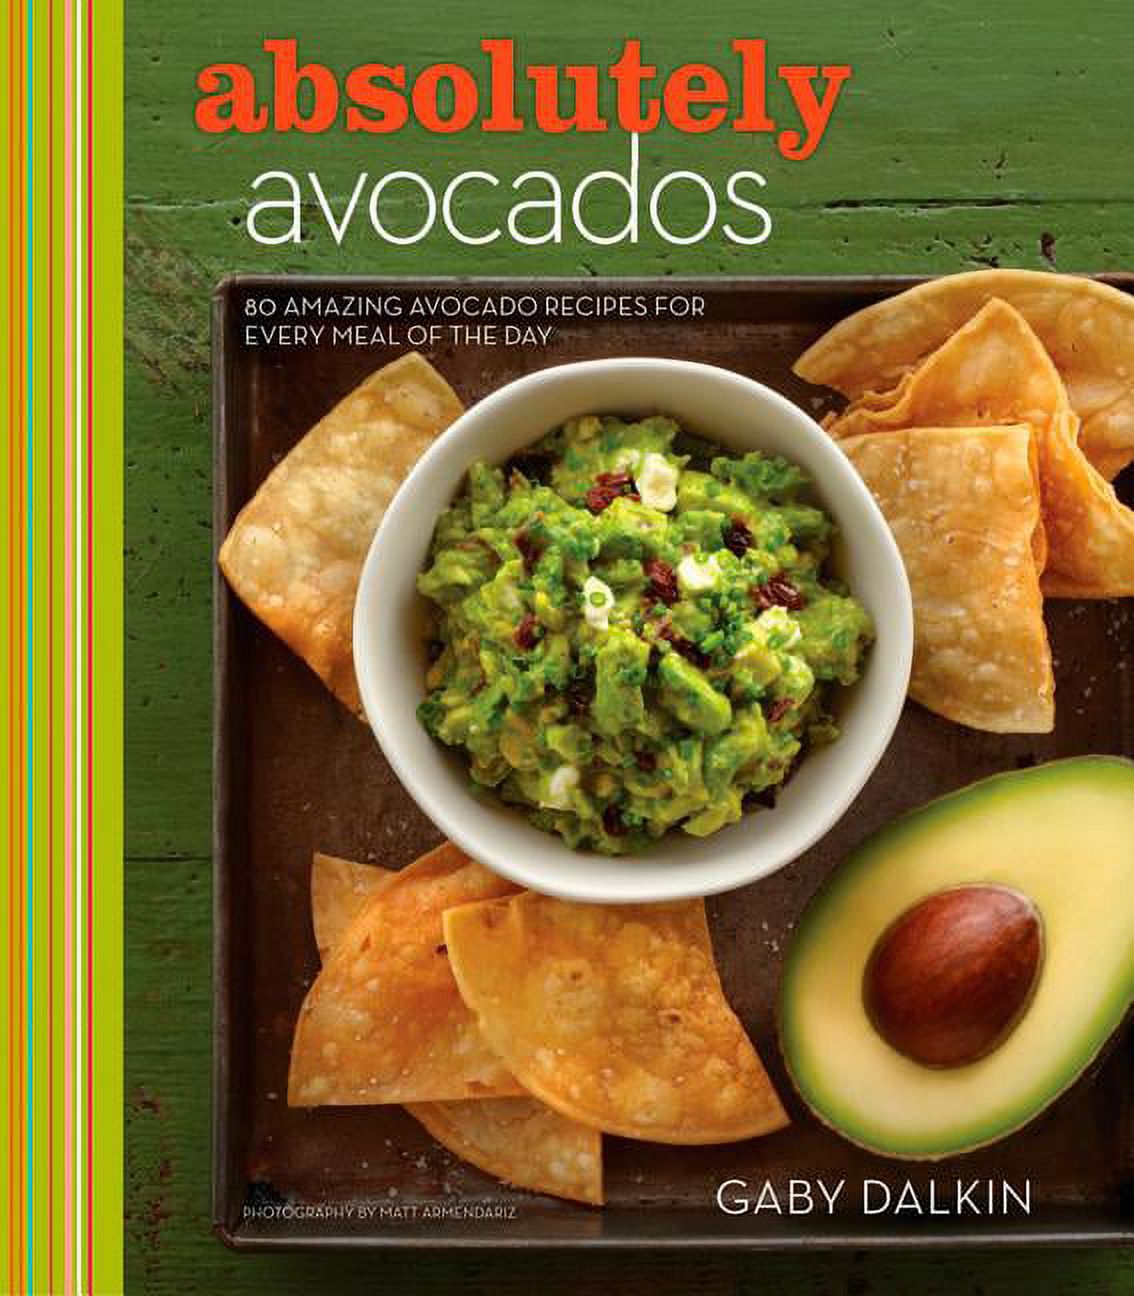 Absolutely Avocados: 80 Amazing Avocado Recipes for Every Meal of the Day (Hardcover) - image 1 of 2